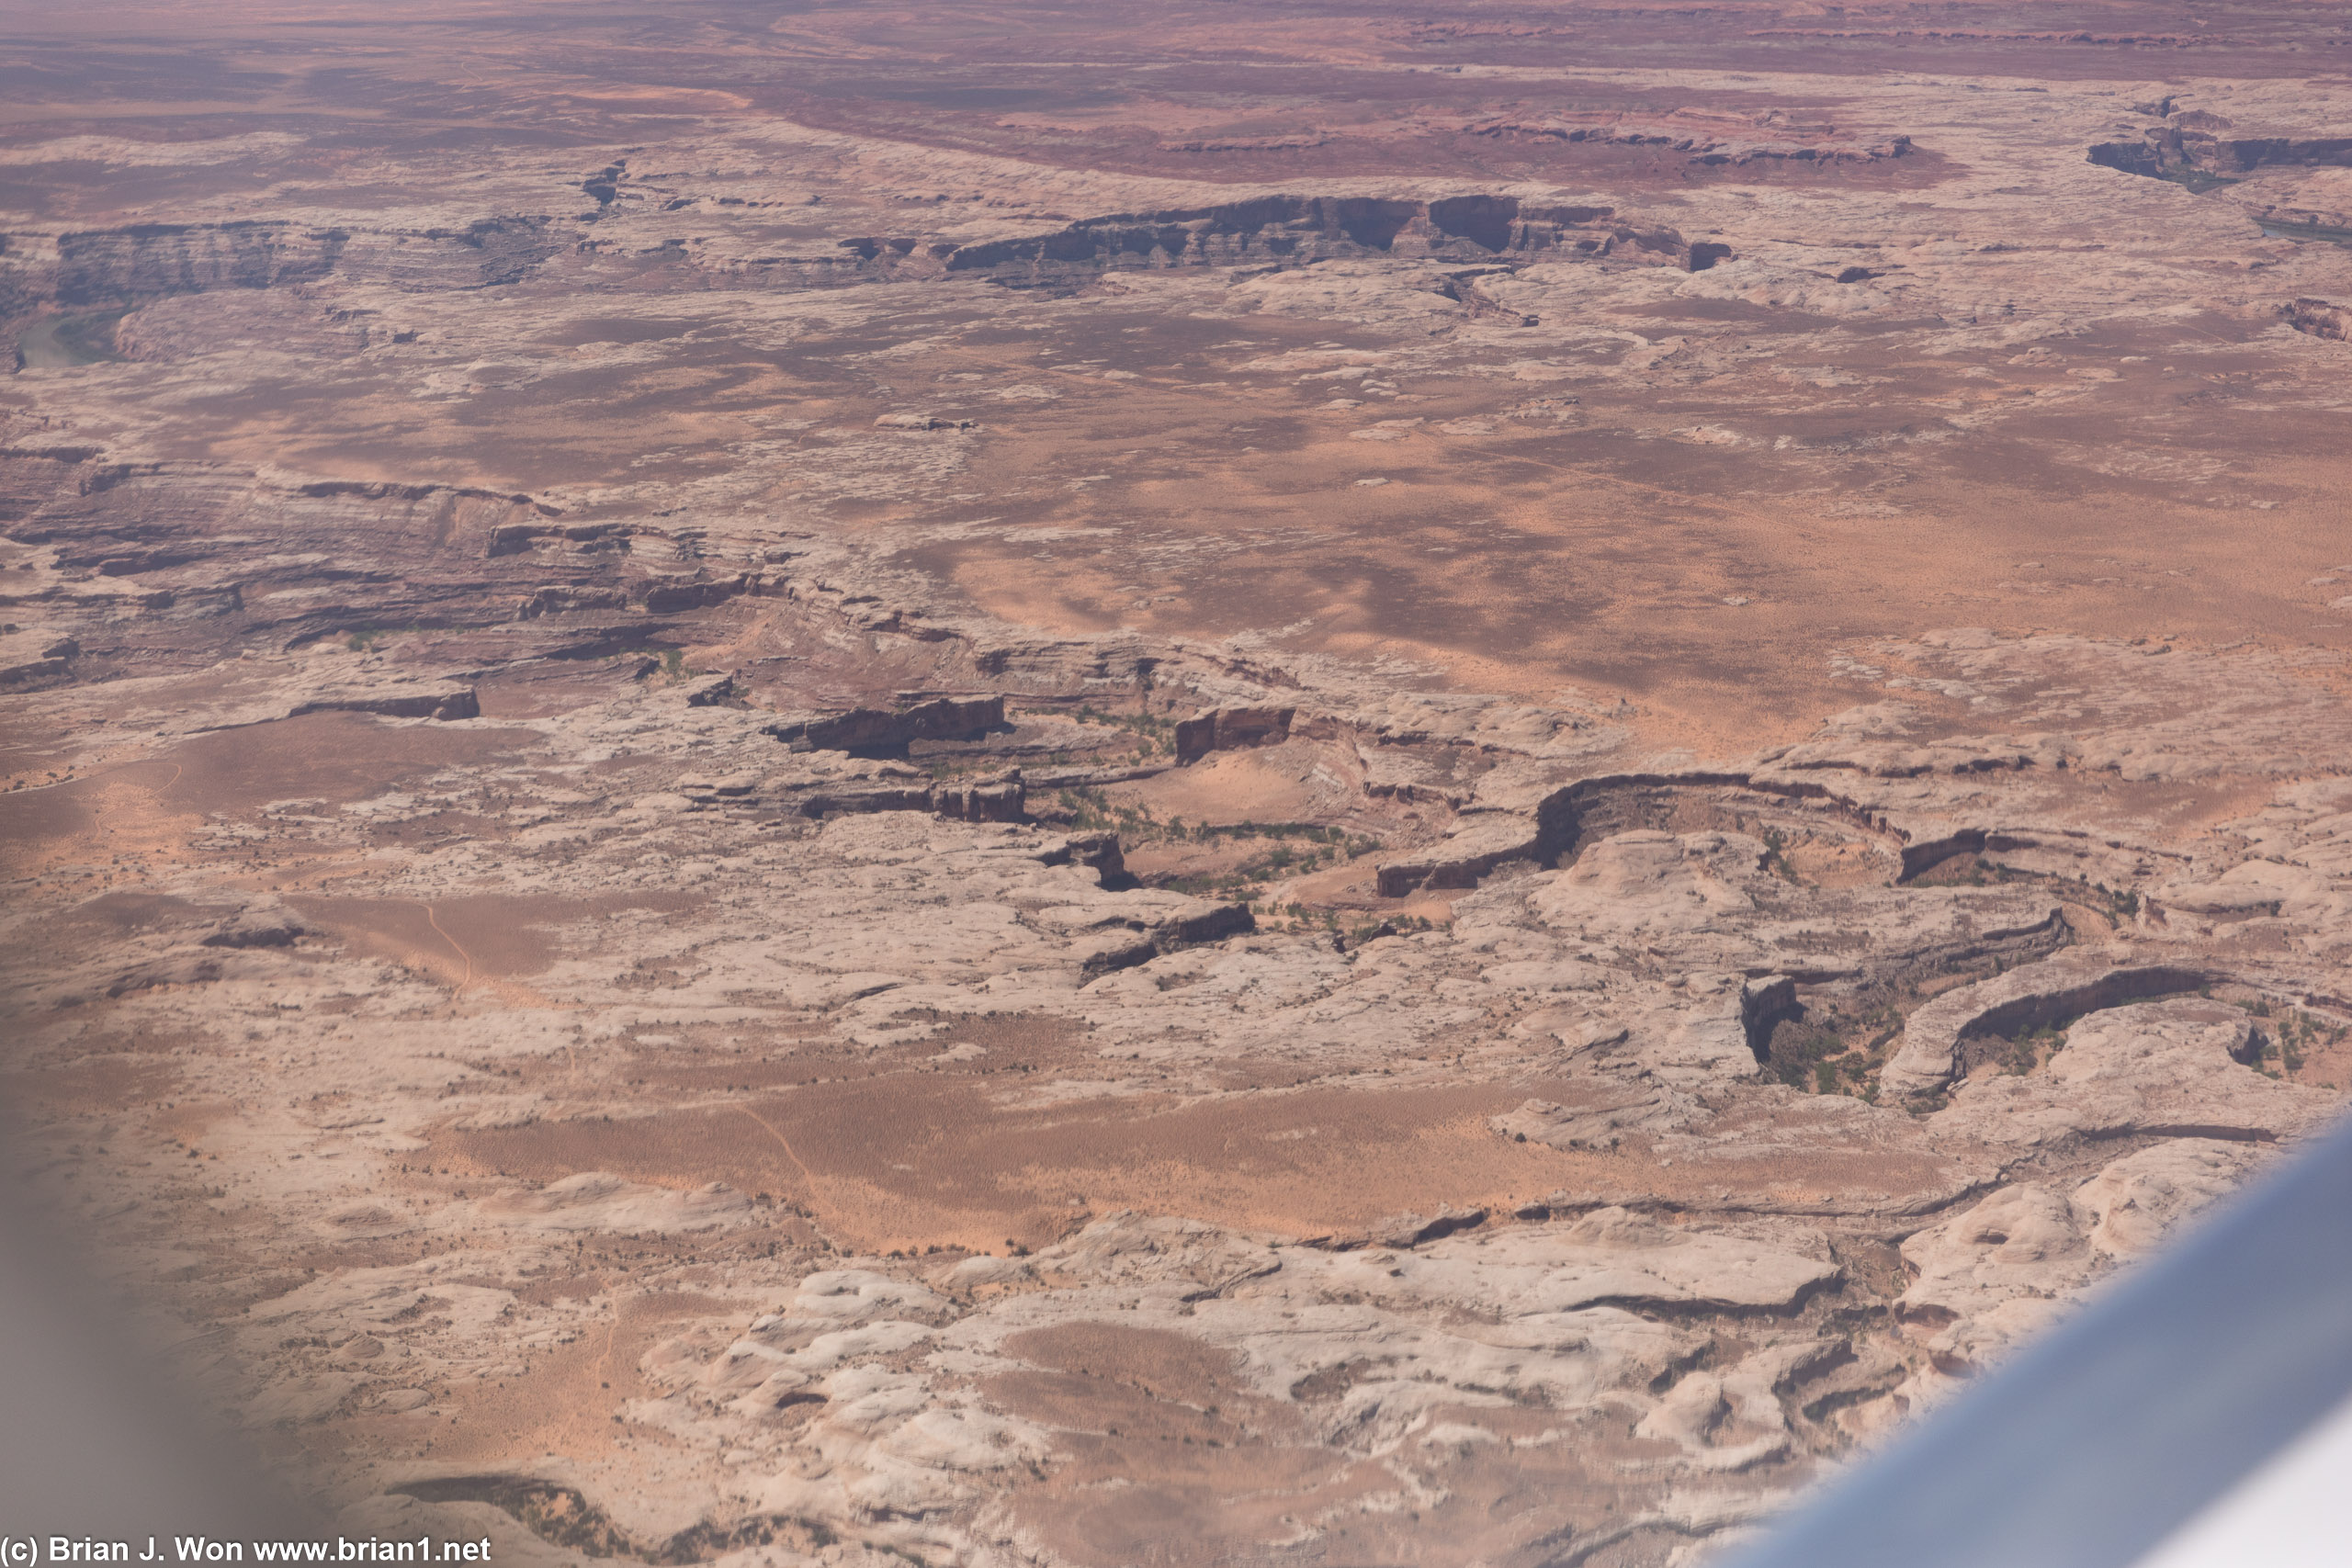 Pretty sure this is Canyonlands National Park or nearby.